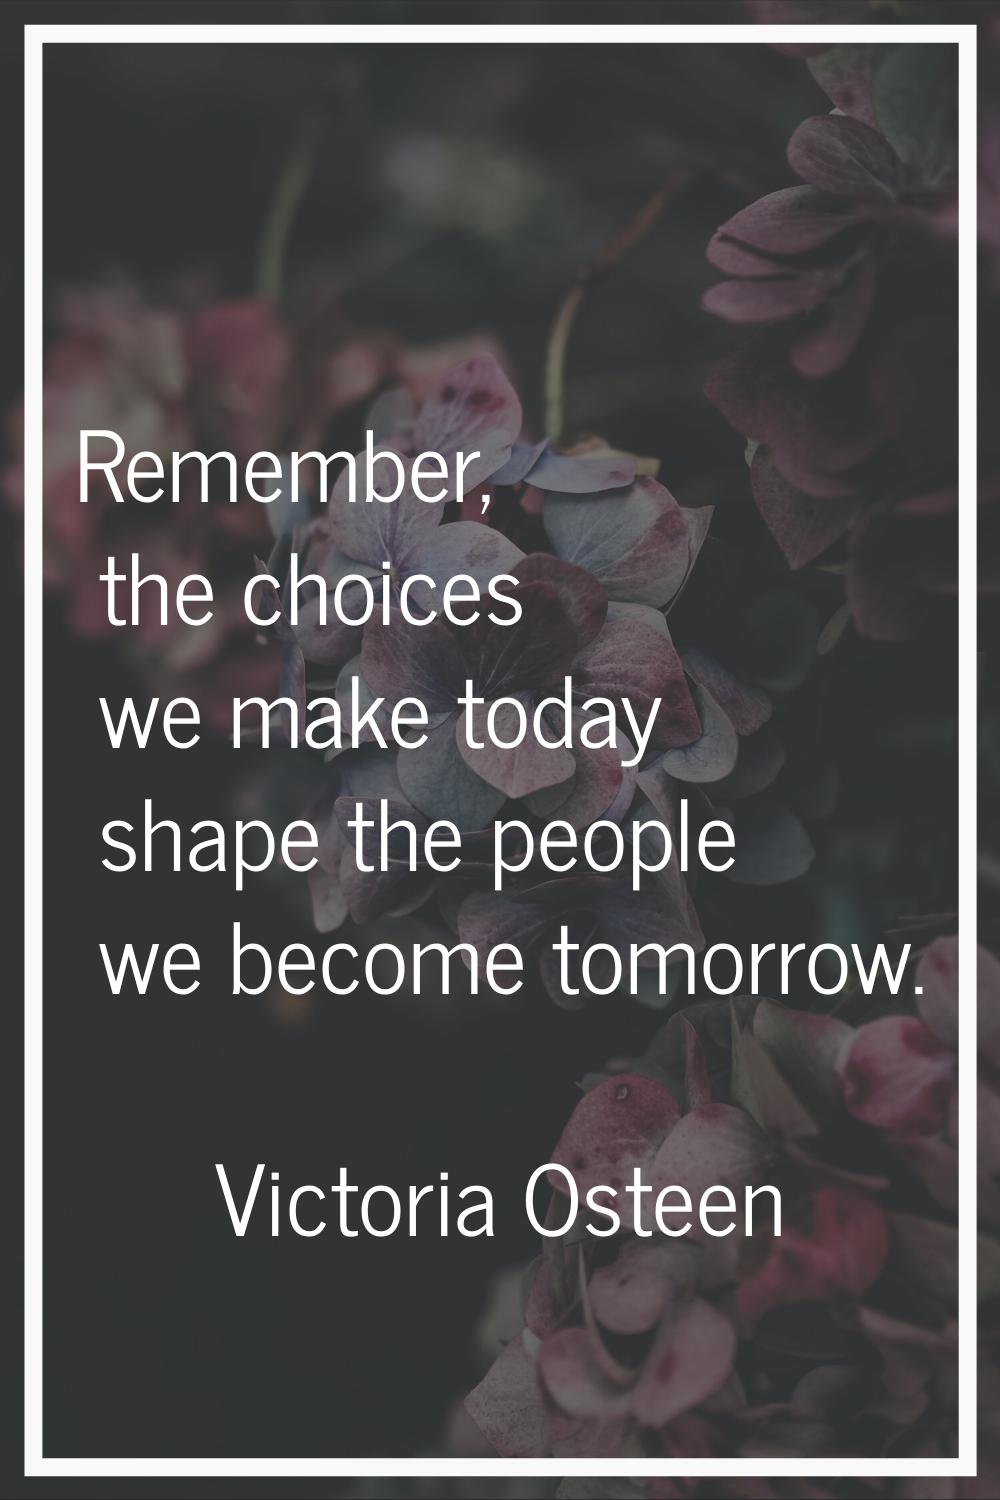 Remember, the choices we make today shape the people we become tomorrow.